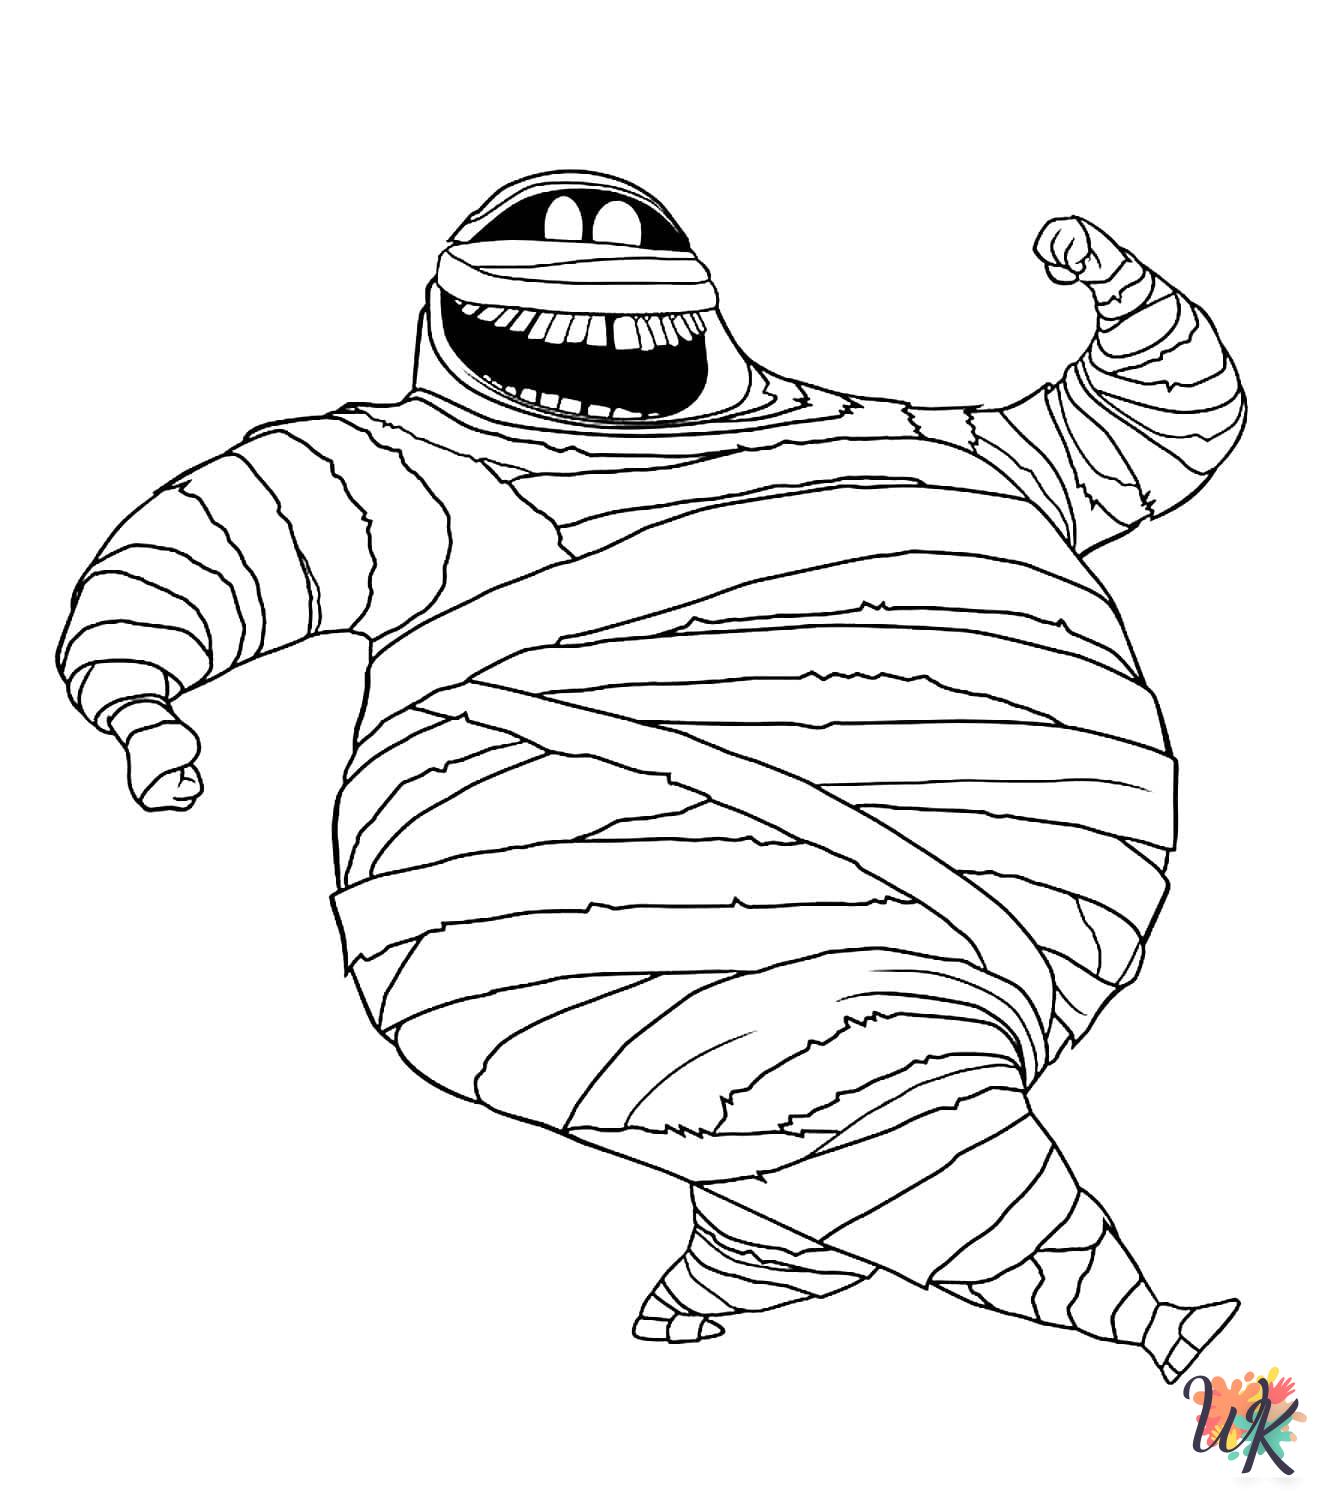 Mummy coloring pages grinch